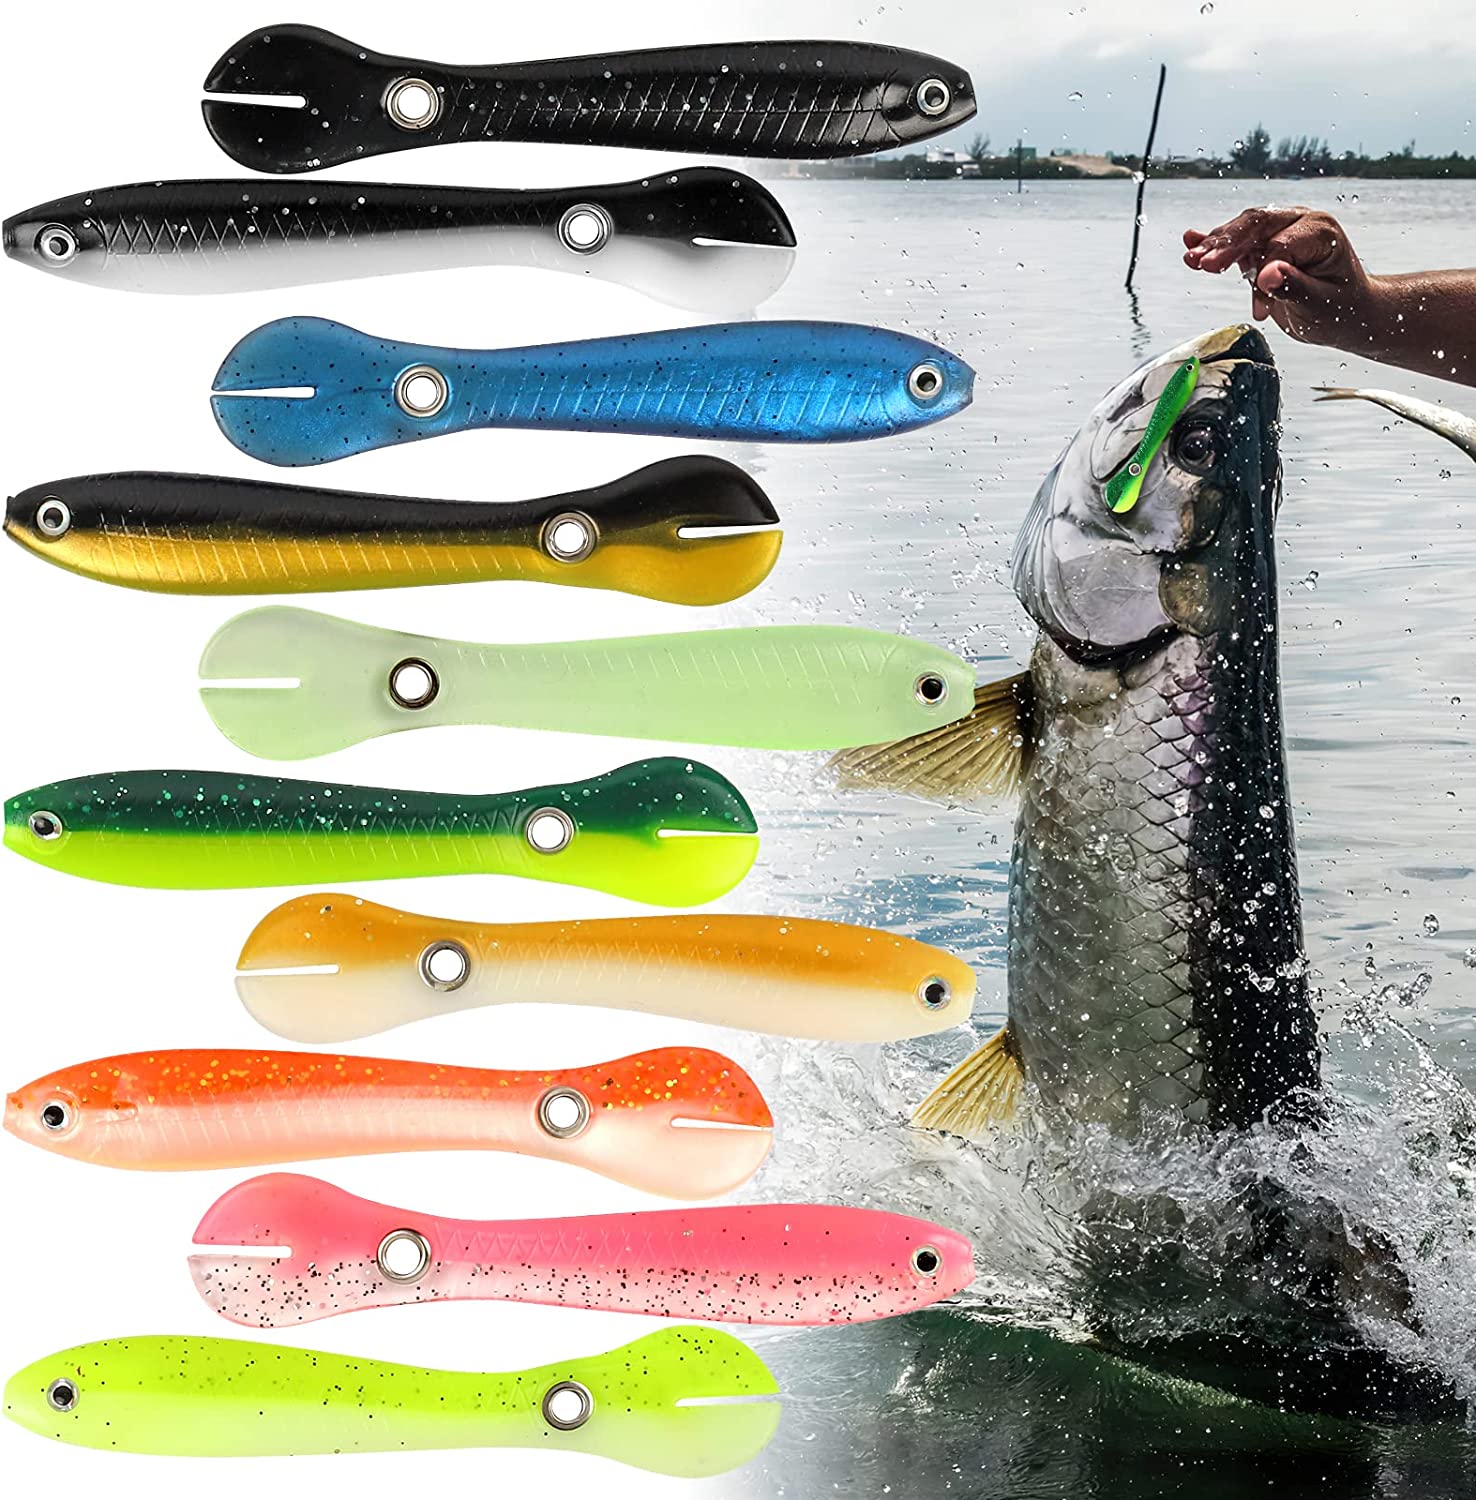 Toddmomy 9 Pcs Freshwater Fishing Lures bass Lures top Water Life-Like  Bionic Baits Propeller 3D Lure Bait, Bait Traps -  Canada